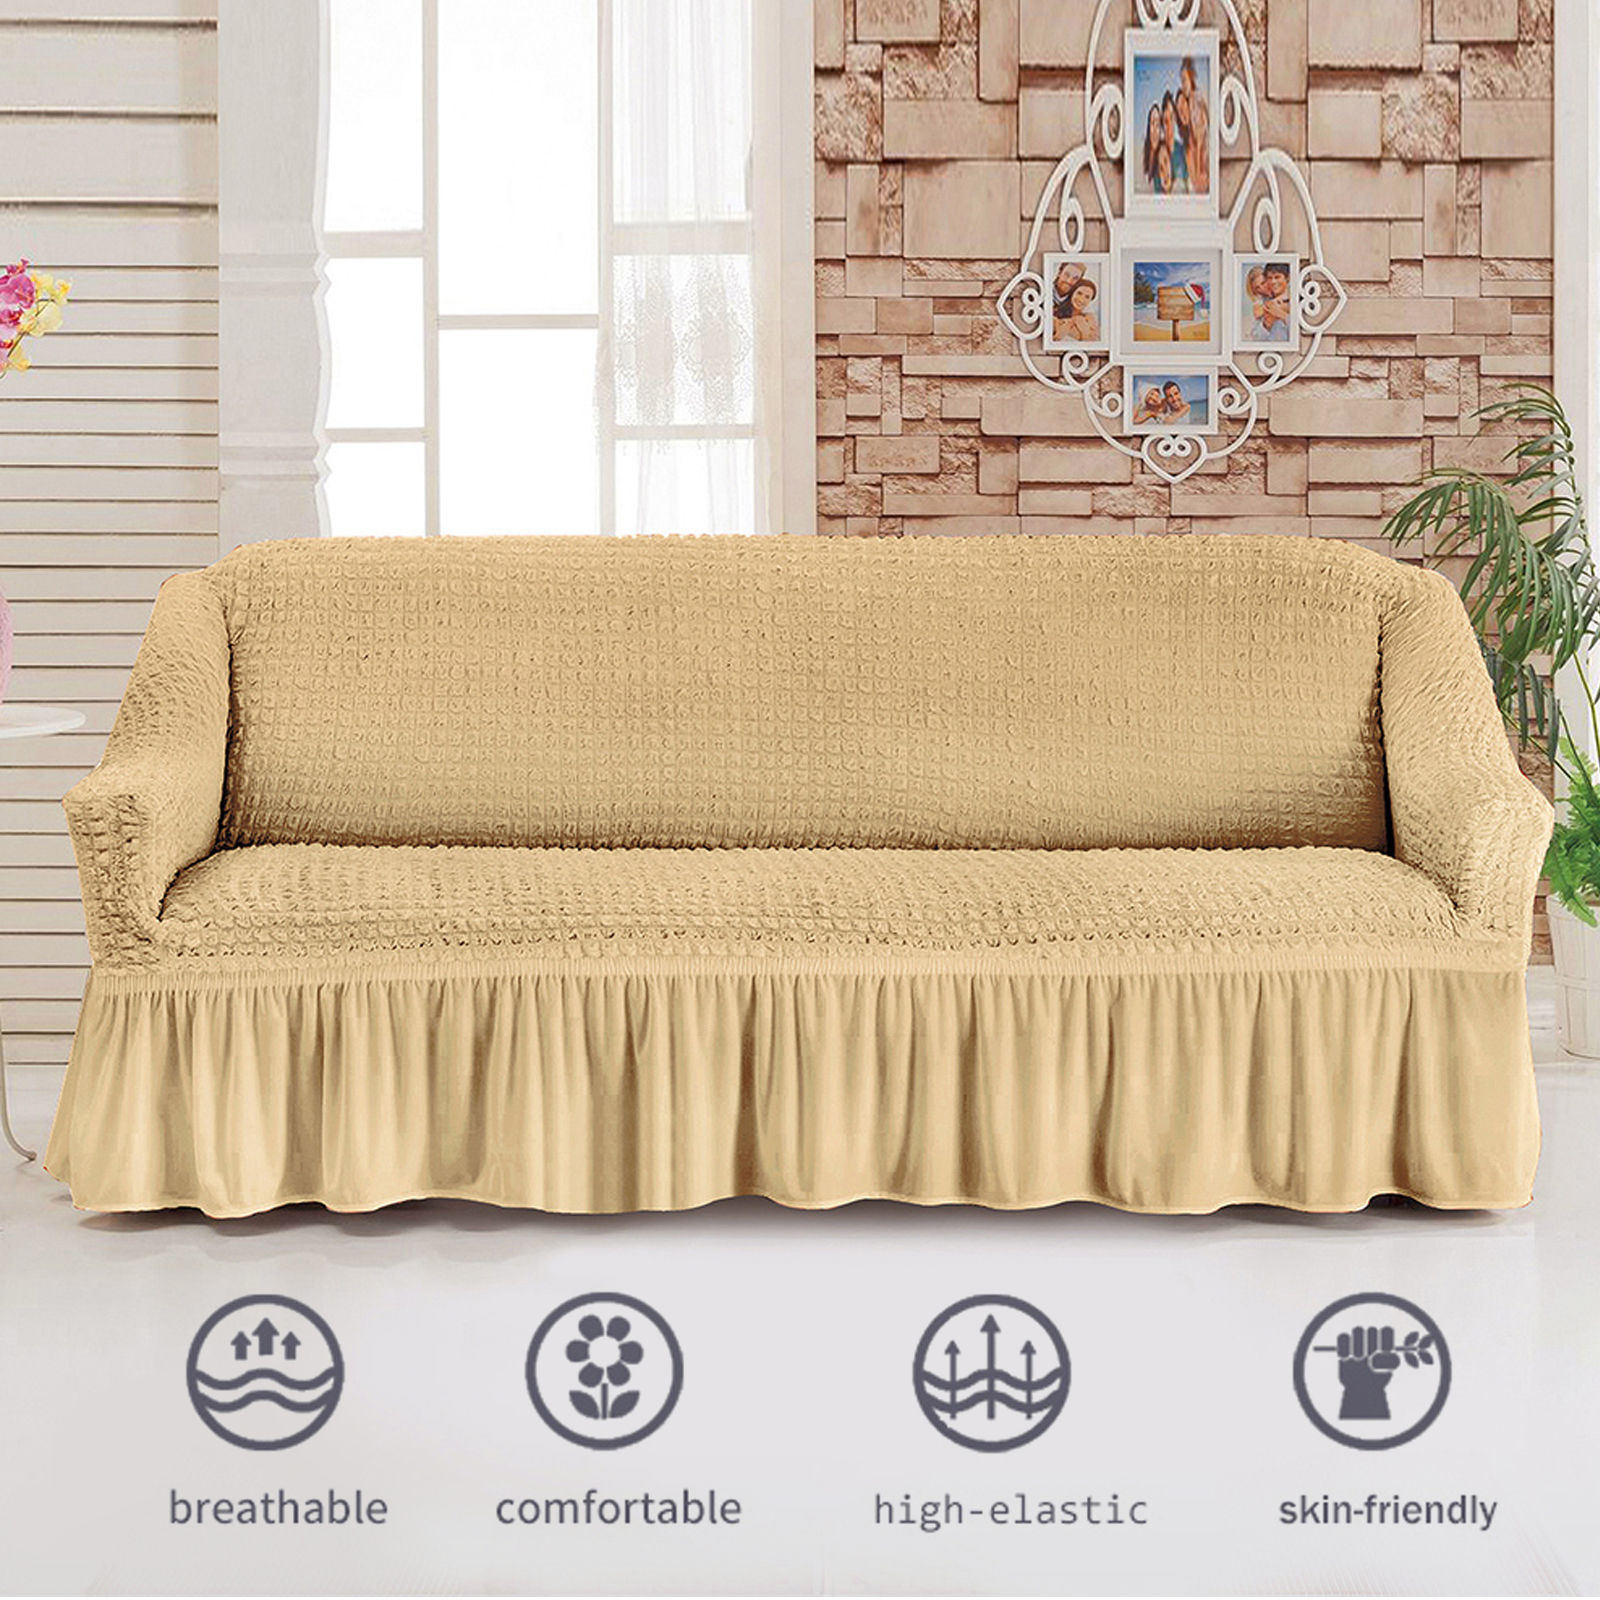 Stretch Sofa Slipcover, 3 Seater Sofa Slipcovers With Skirt With Armless Soft Sofa Cover Elastic Straps Sofa Slipcover For Living Room Kids Pets-Yellow A-Small